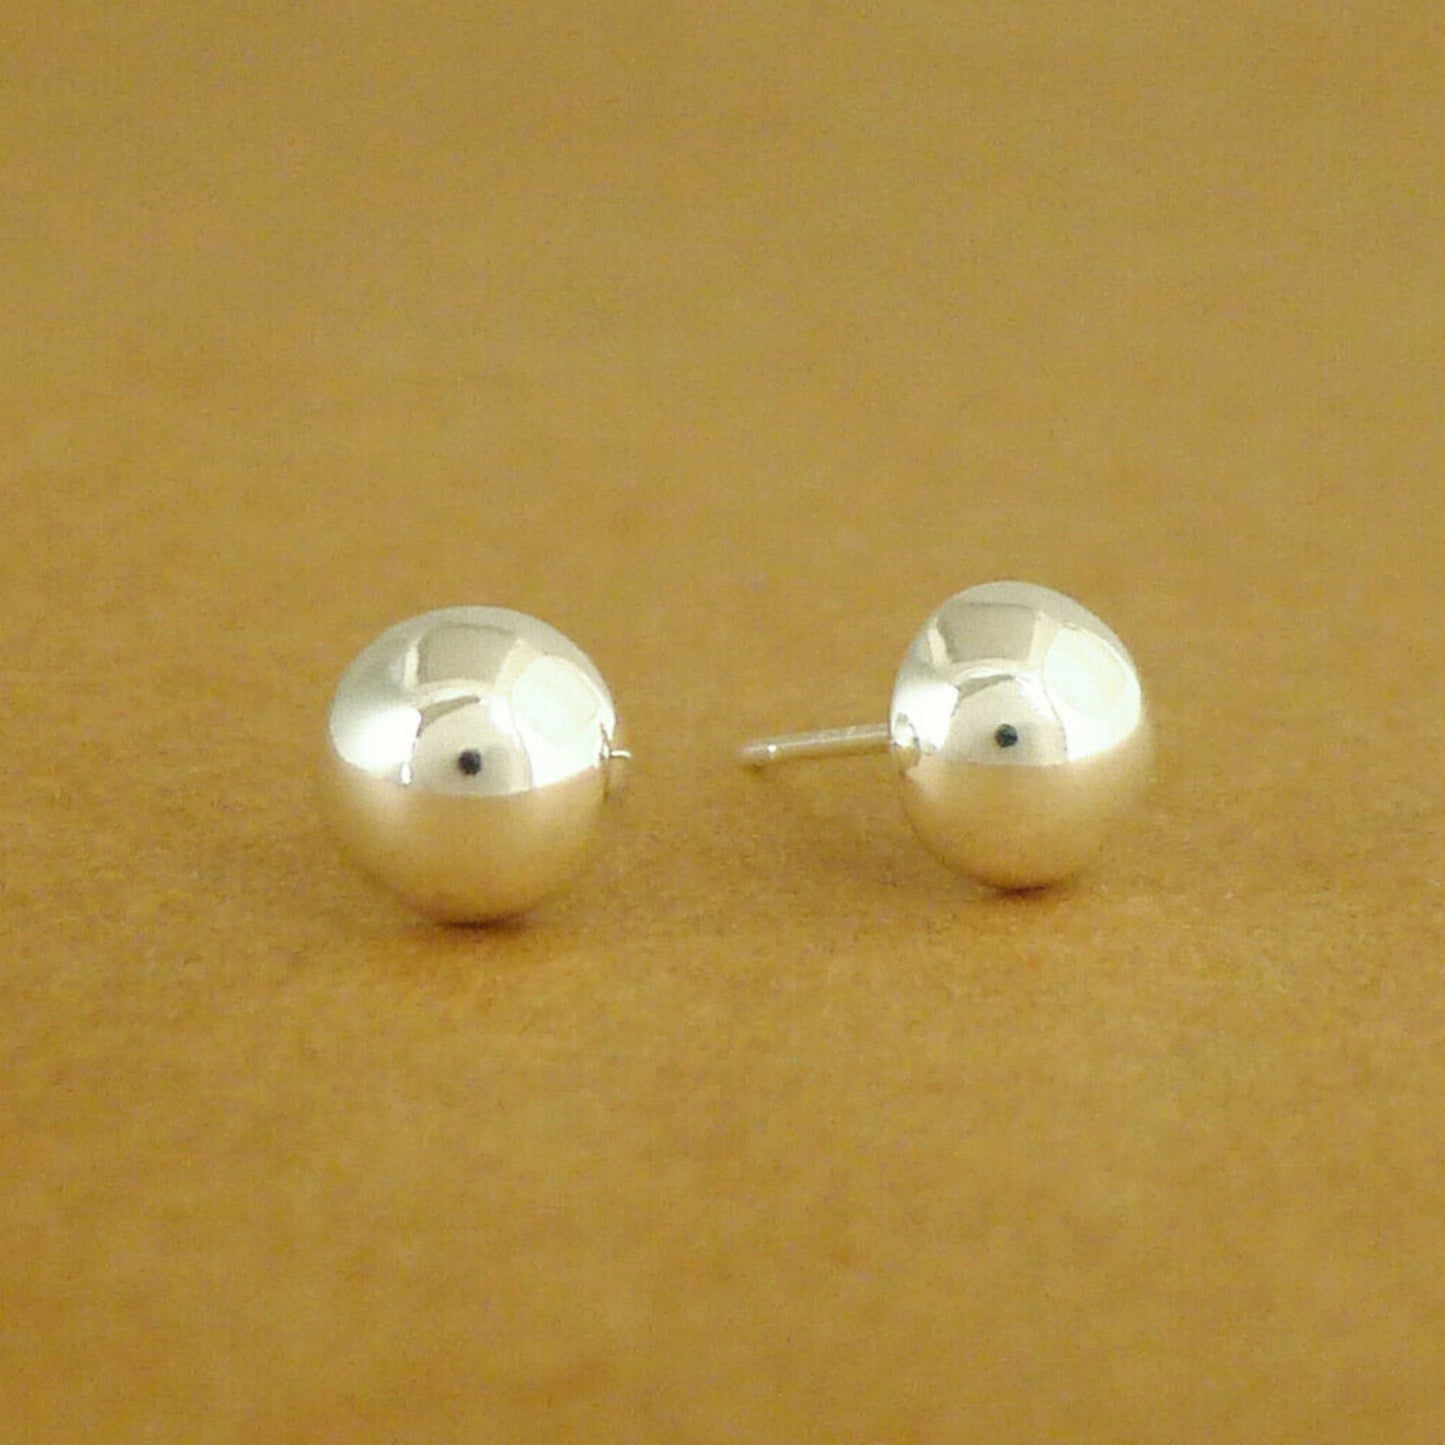 925 Sterling Silver Dome Earrings with 7.5mm Round Studs - sugarkittenlondon